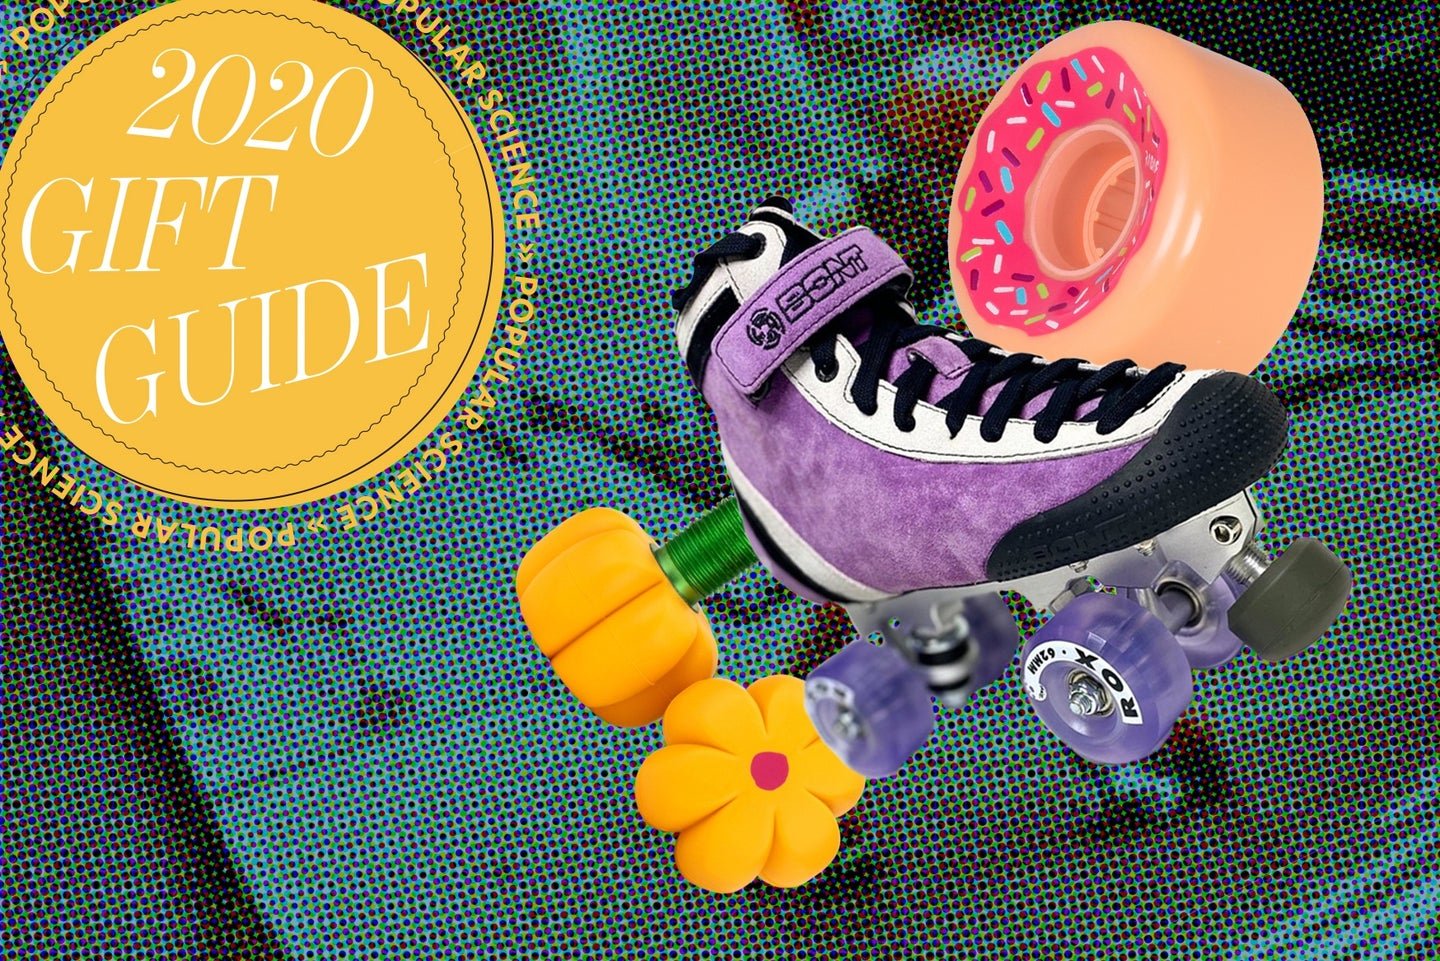 Glide into a new roller skater’s heart with these cool gifts